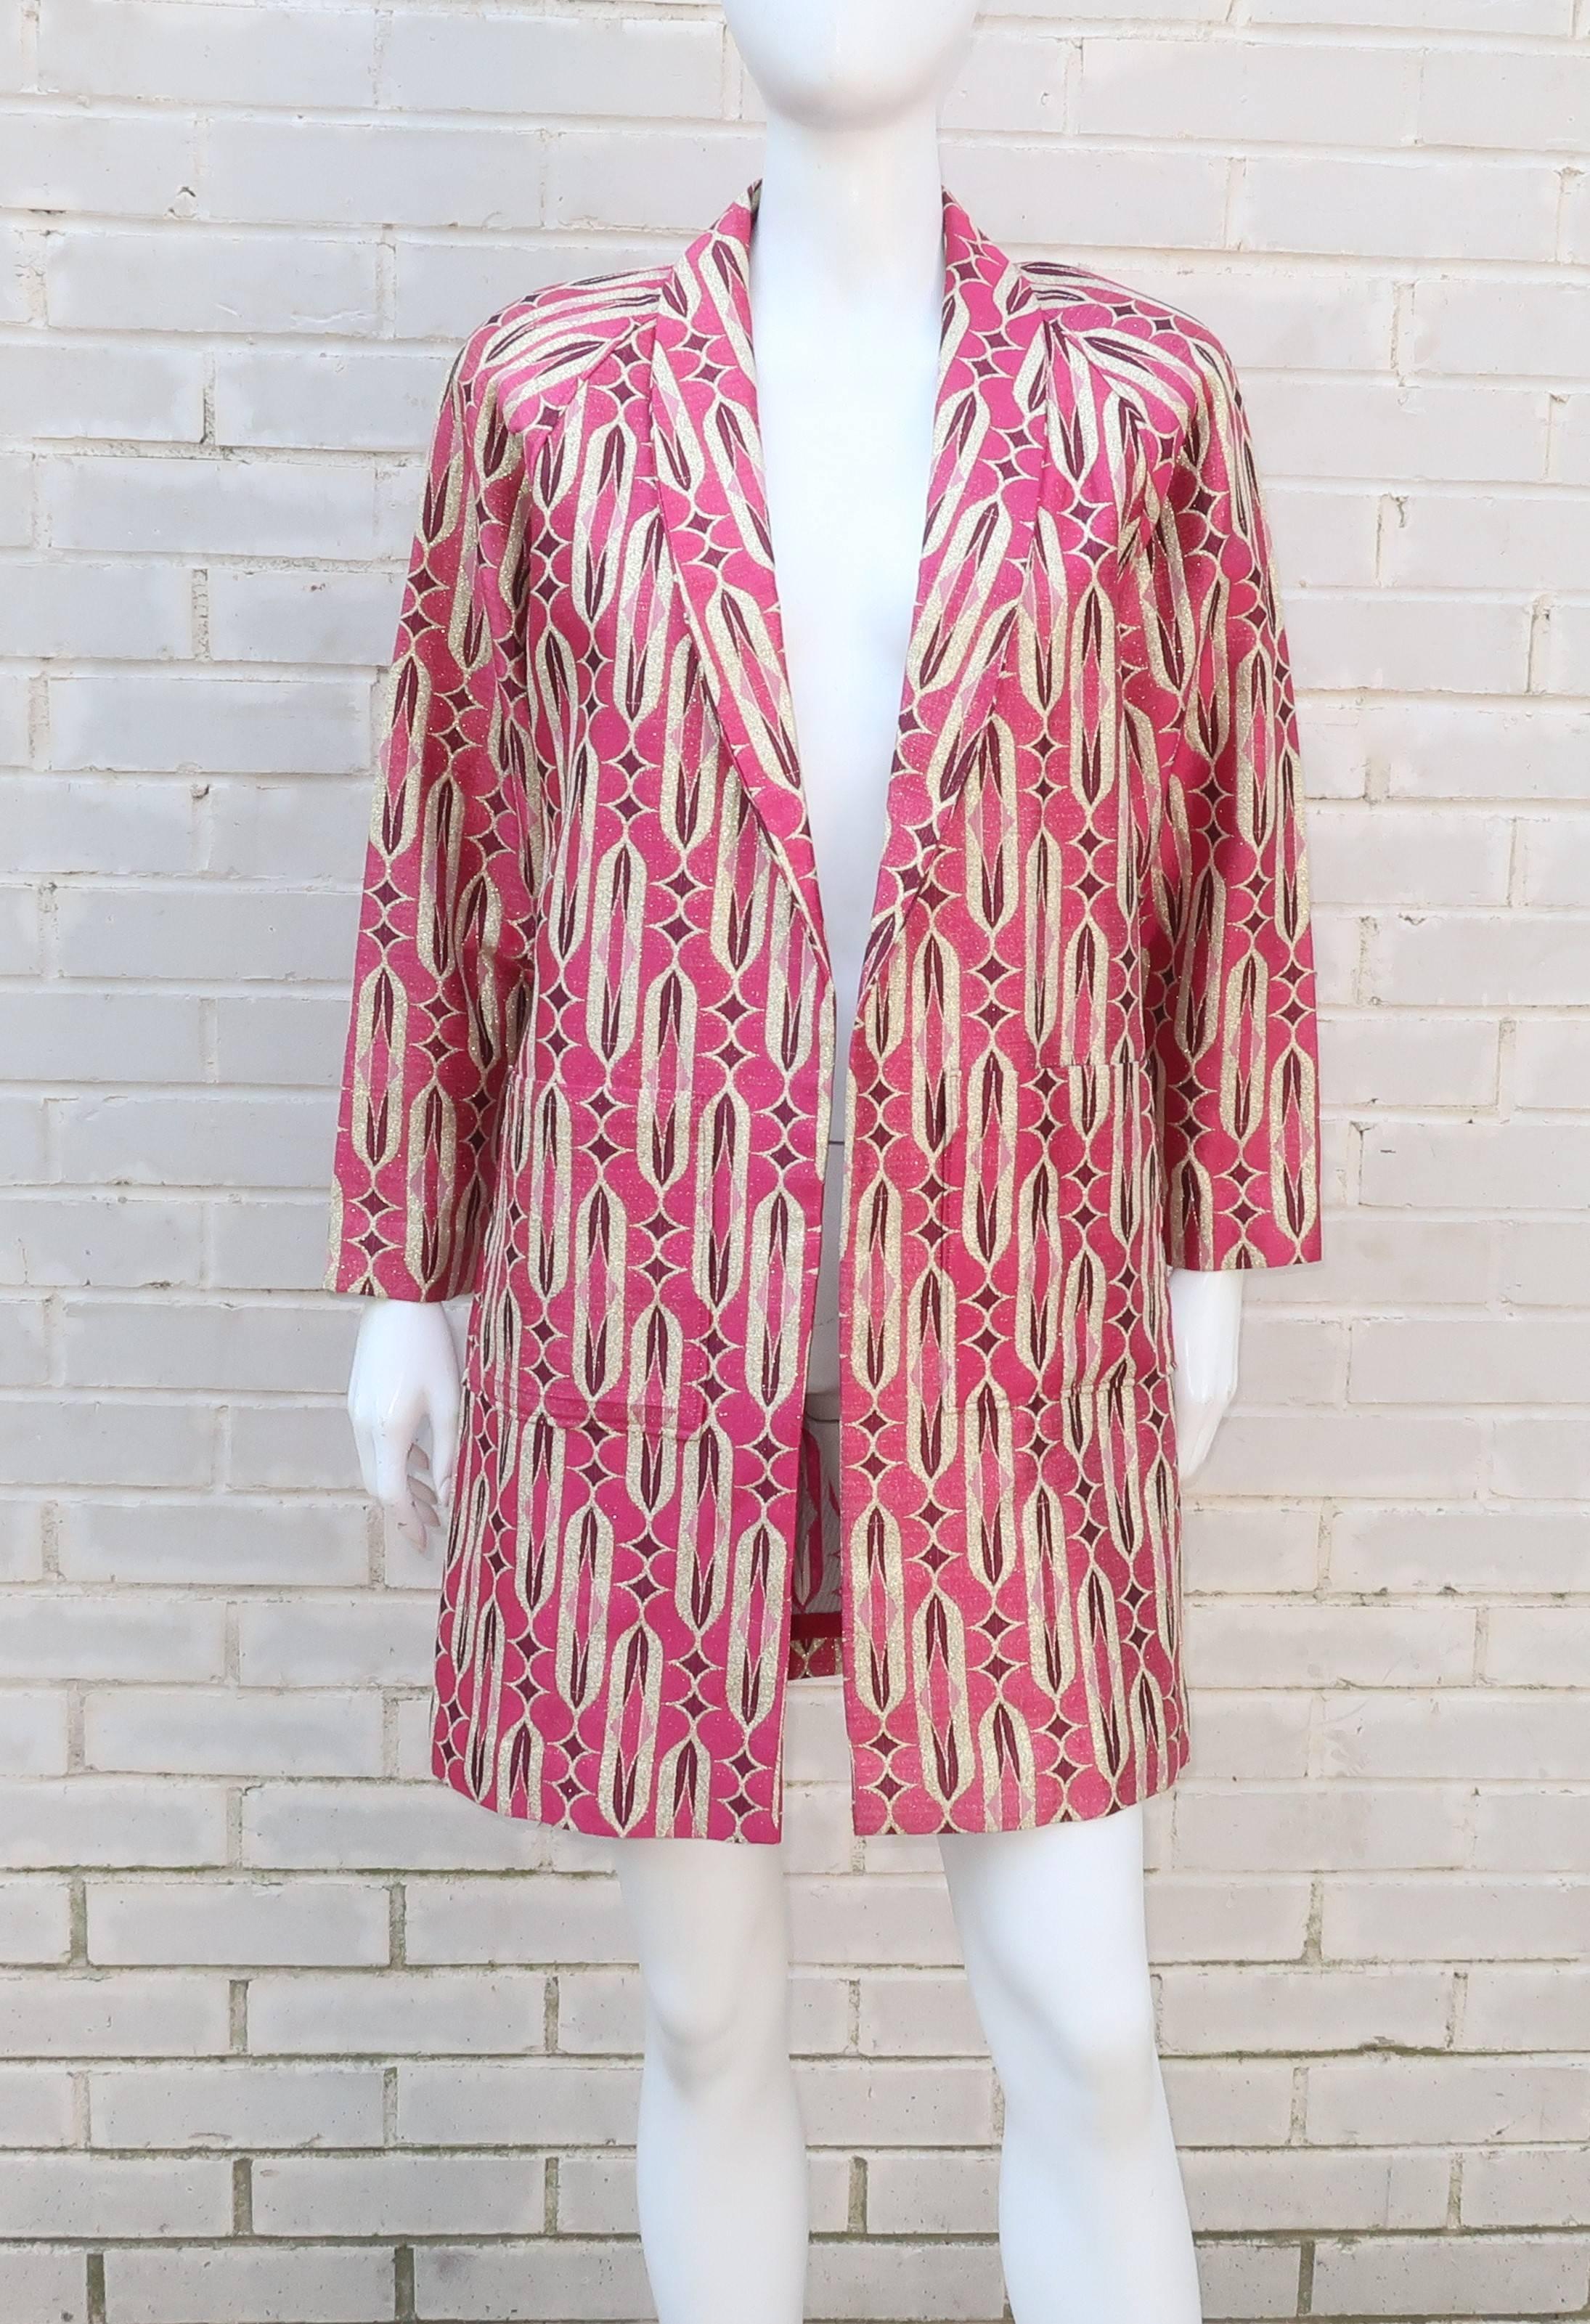 Get all glammed up with this C.1980 pink and gold lamé mod printed jacket.  The boxy boyfriend style silhouette makes this cutie a versatile choice for everything from a fun topper with jeans and t-shirt to outerwear for a mini dress.  The graphic